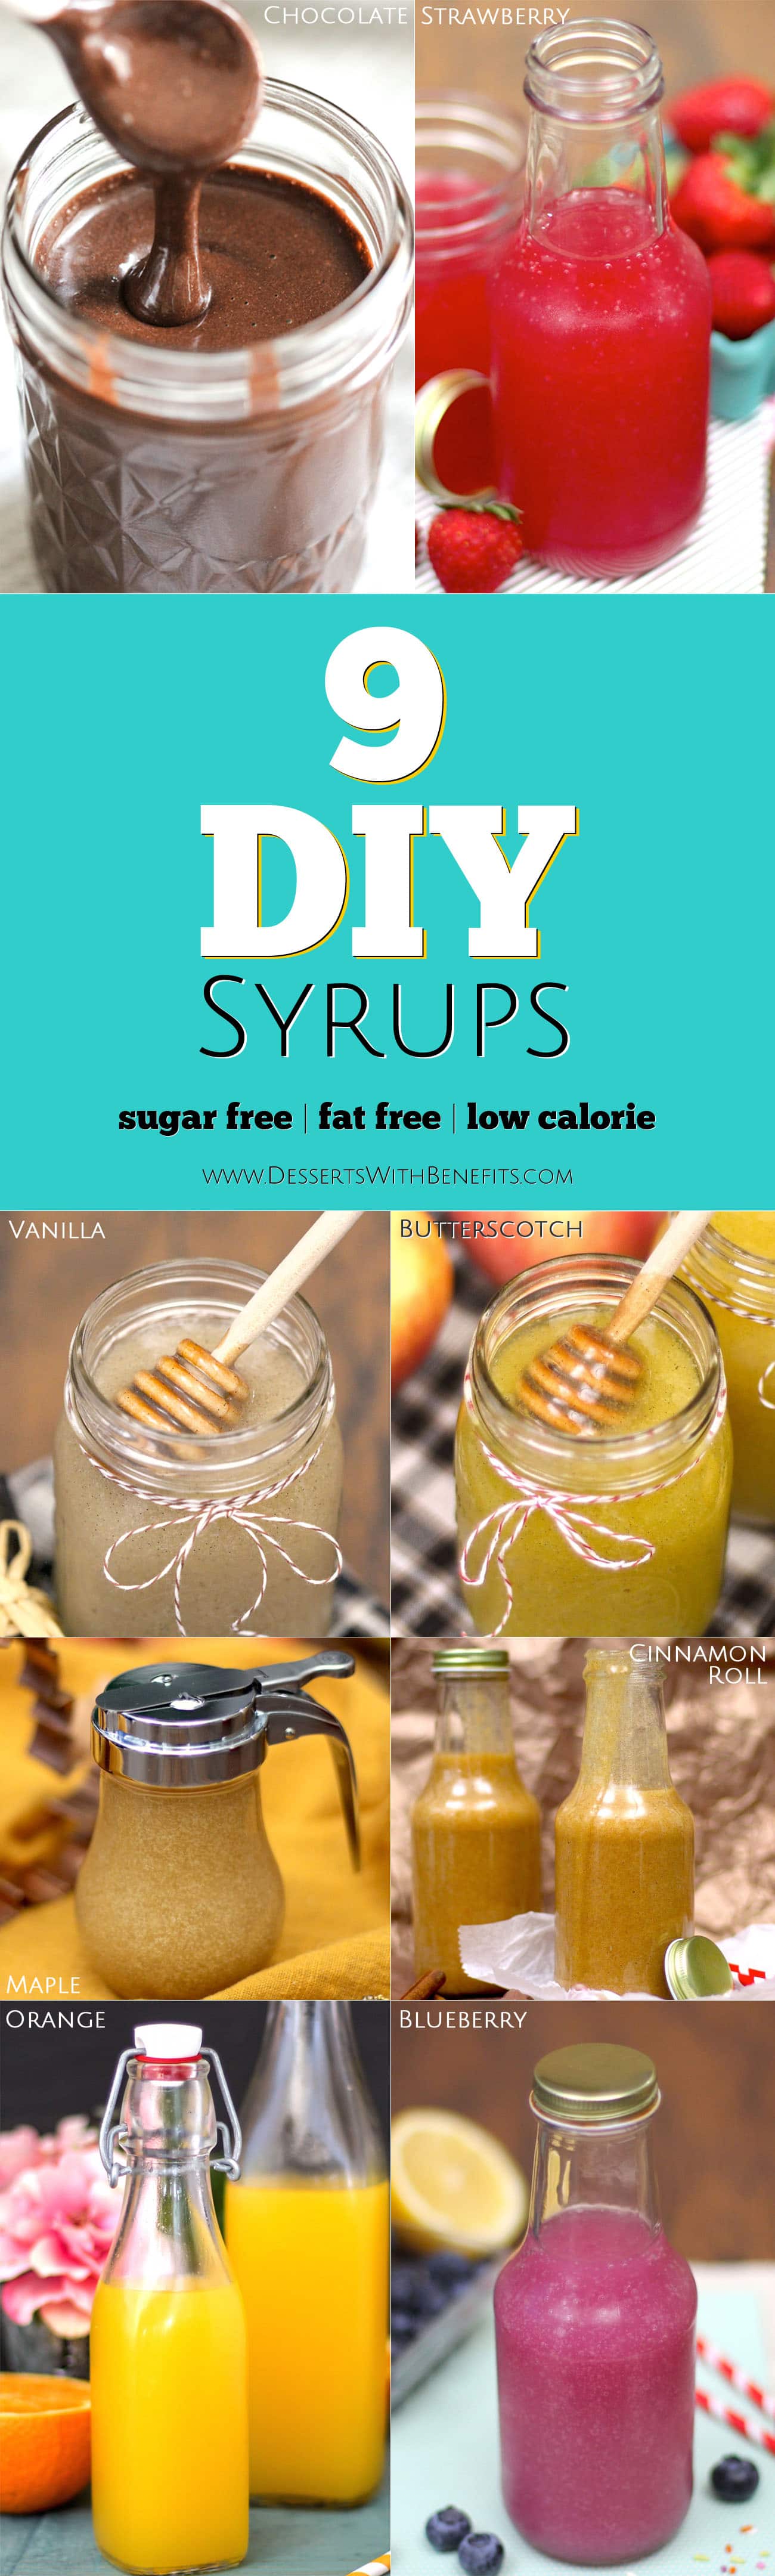 9 super SIMPLE, QUICK and EASY DIY Syrups! These guilt-free recipes are sweet and delicious, yet sugar free, fat free, low calorie, and all natural (but they sure don’t taste guilt-free)! Healthy DIY Recipes at Desserts with Benefits